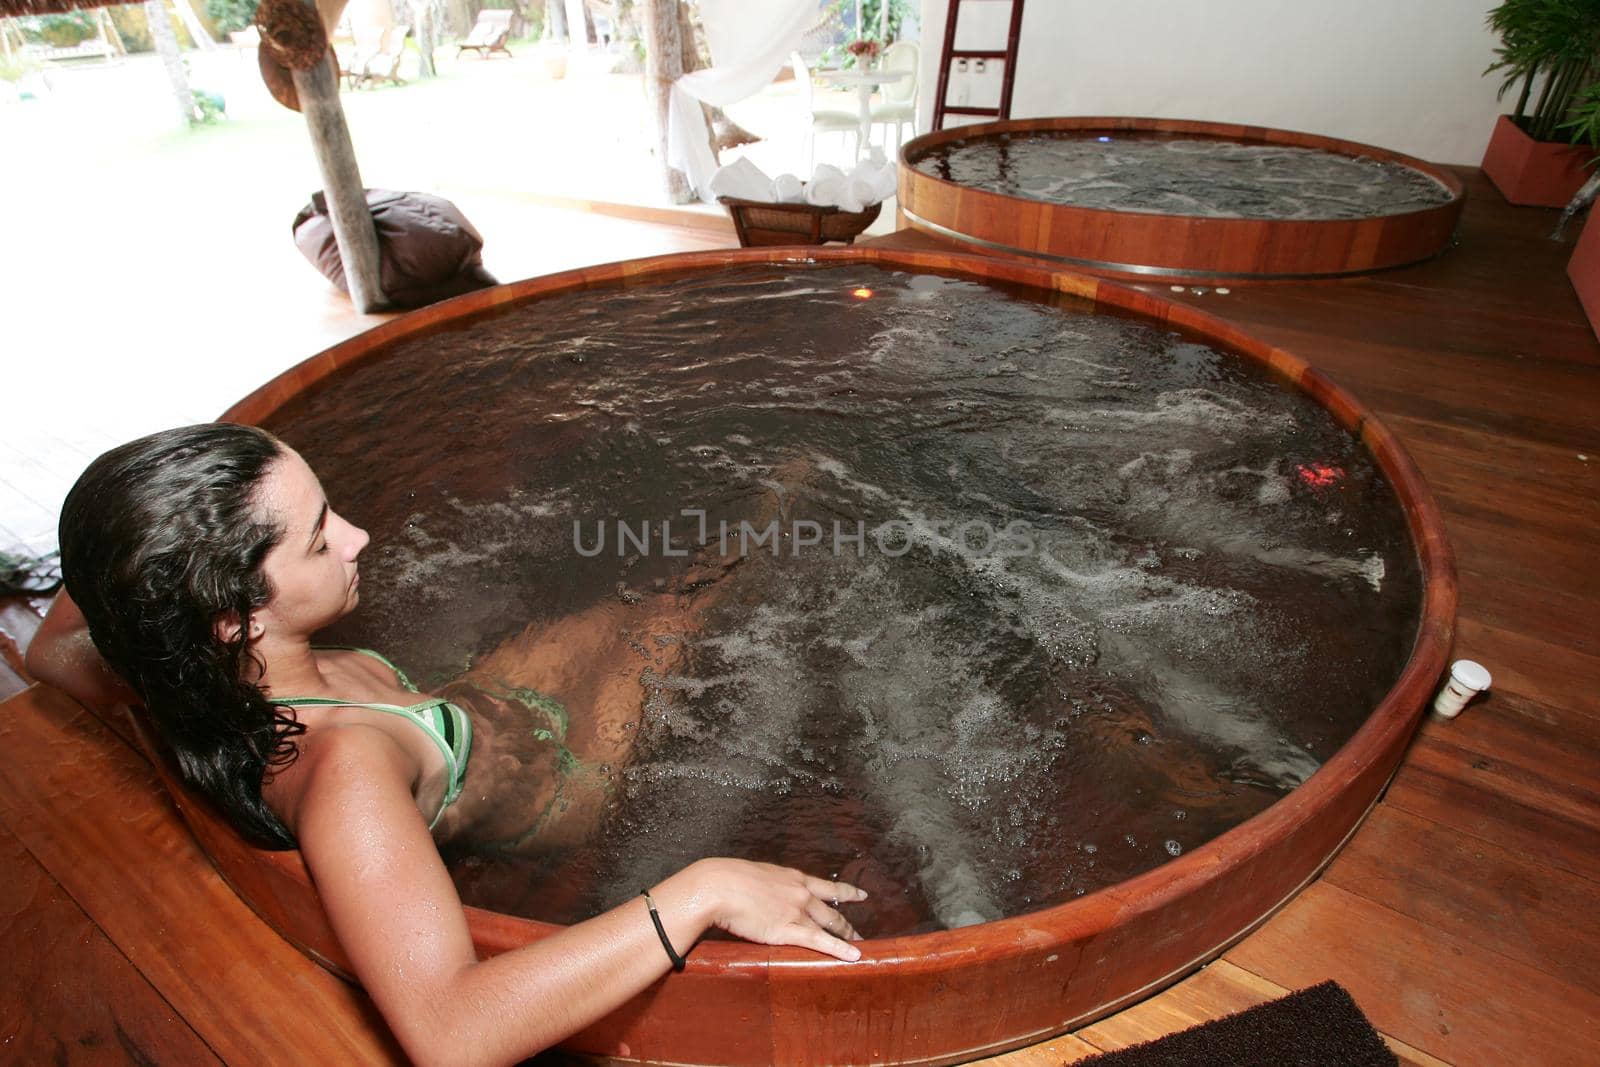 porto Seguro, bahia / brazil - january 2, 2010: Young man is seen in a hot tub in a hotal in the city of Porto Seguro, in the south of Bahia.